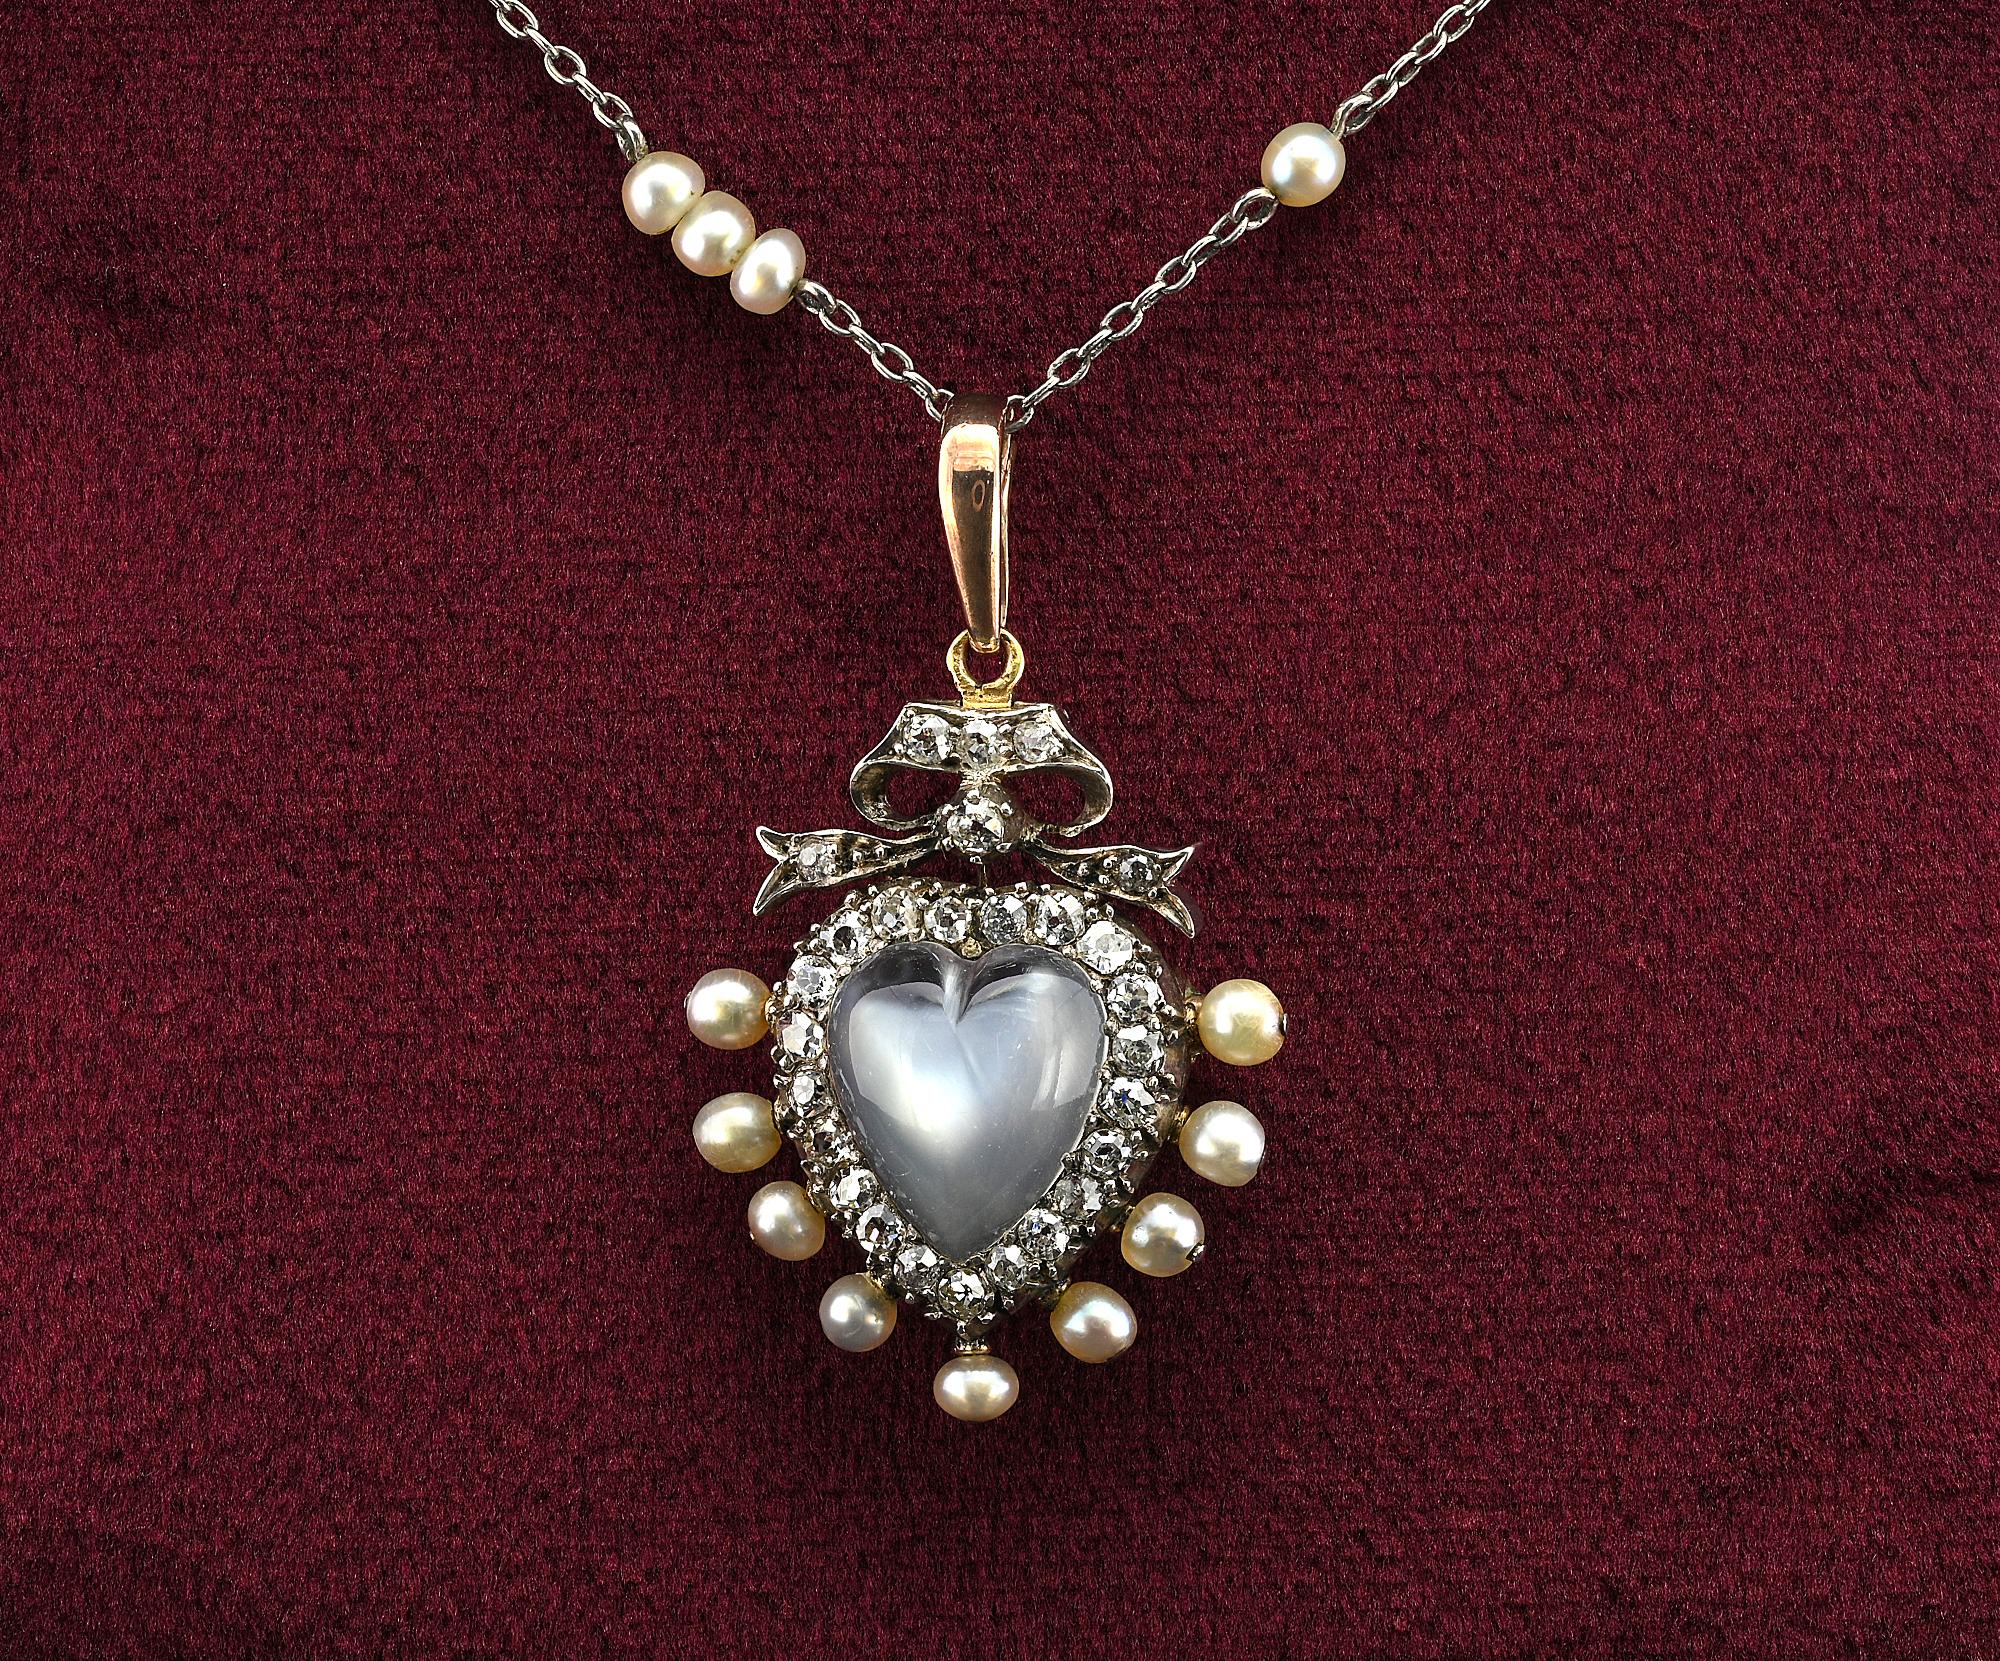 This superb 19th example of sentimental heart pendant is made of silver over 10 Carat gold electronically tested – it can b worn as a brooch too
The large luminous heart carved Moonstone is approx 3.00 Ct (11.1 x 10.8 mm) surrounded by 27 old mine